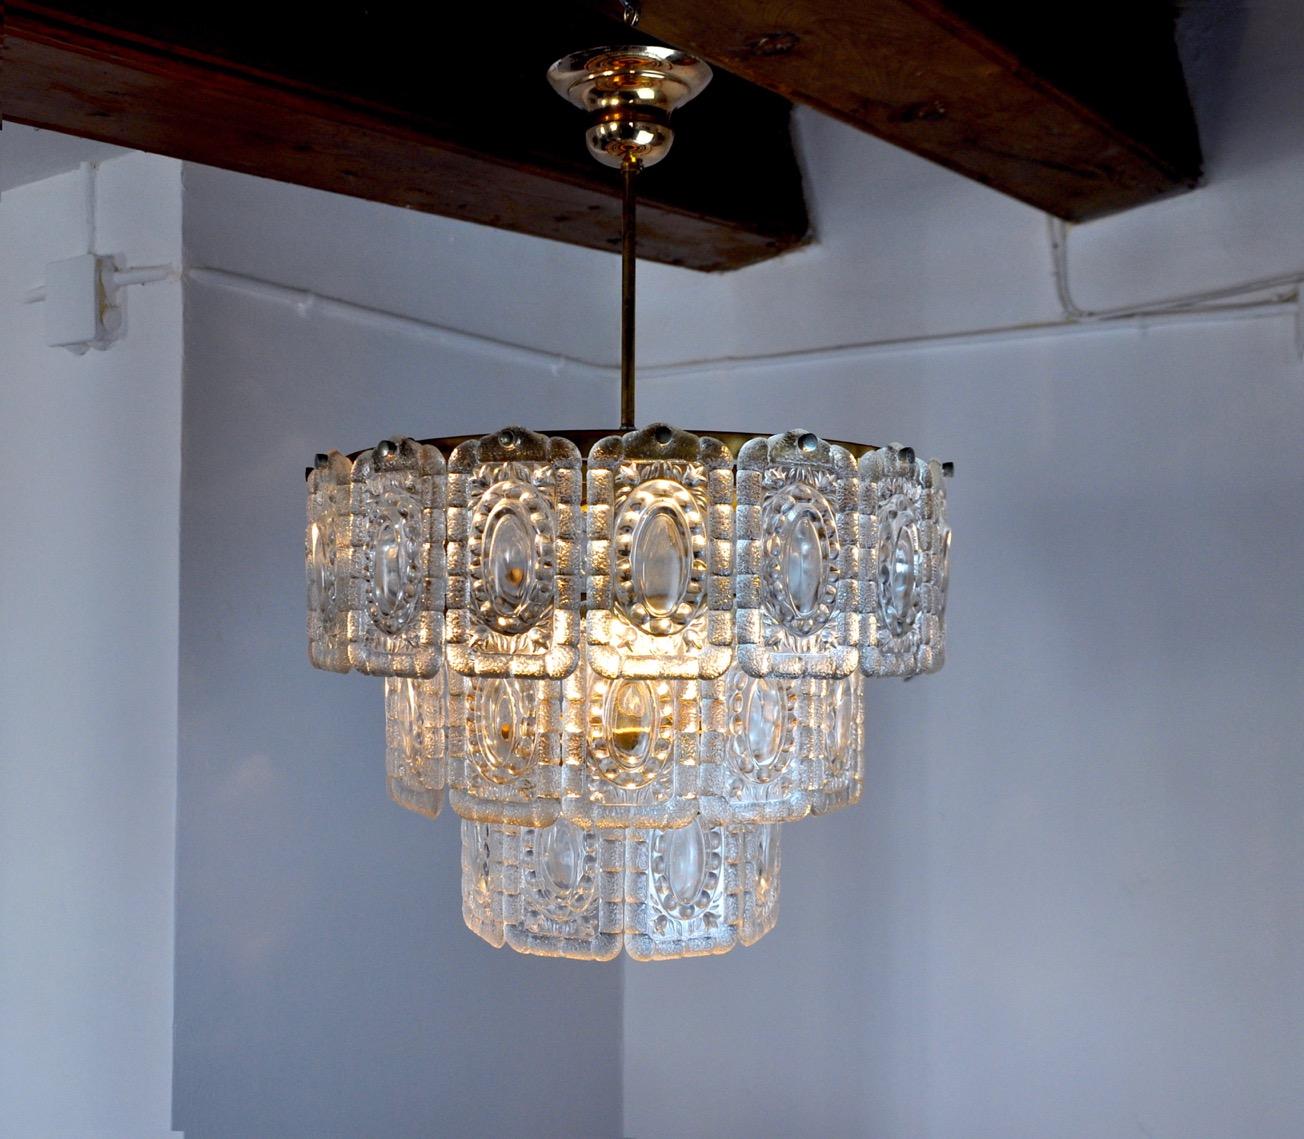 Superb and rare Kinkeldey chandelier designated and produced in Germany in the 1970s. Golden structure made up of more than 20 crystals cut in perfect conservation order spread over 3 levels. Rare design object that will illuminate your interior